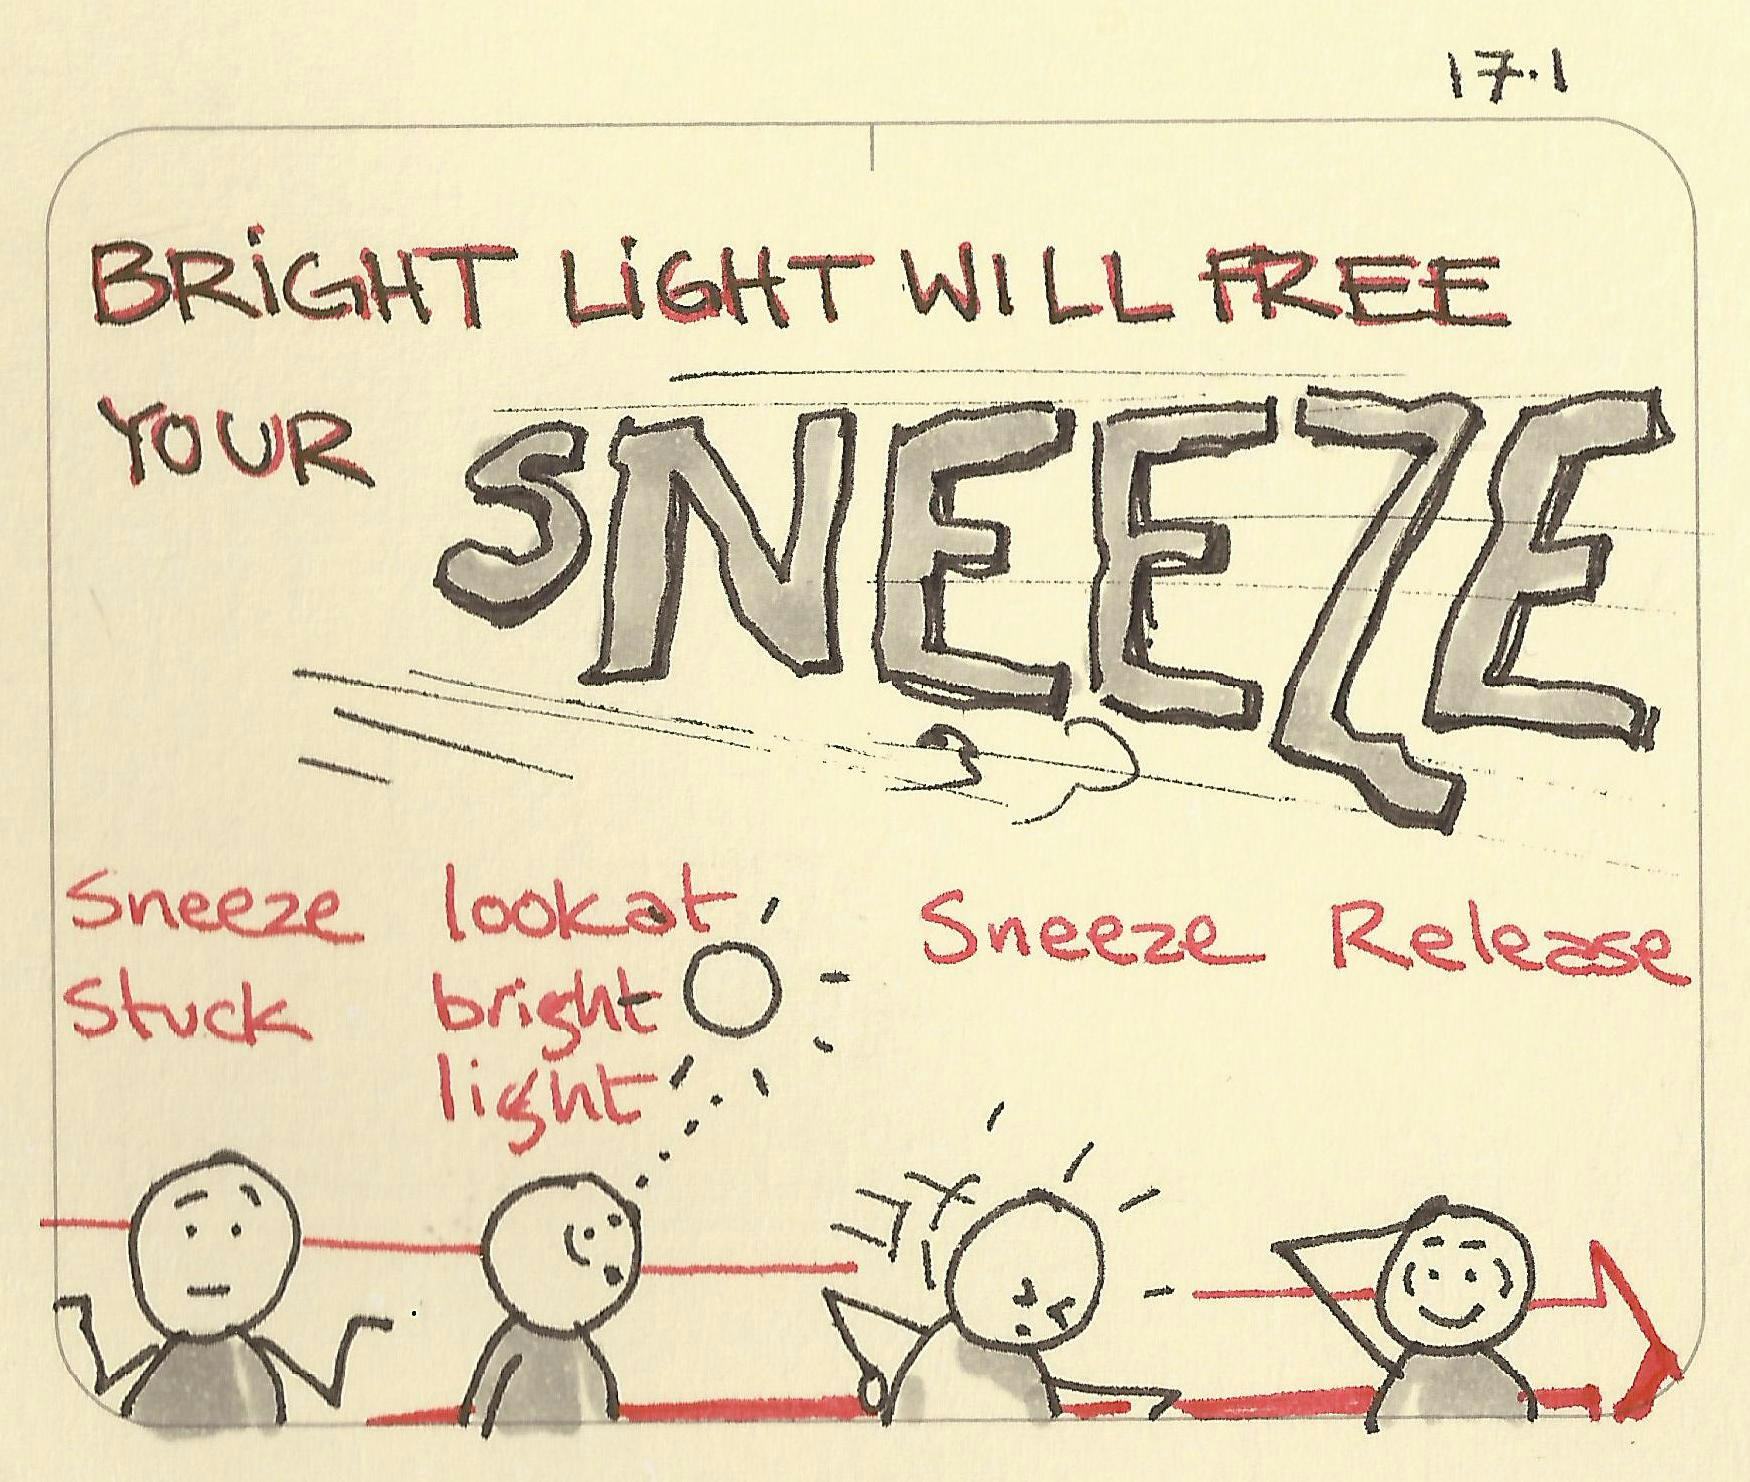 Bright light will free your sneeze - Sketchplanations